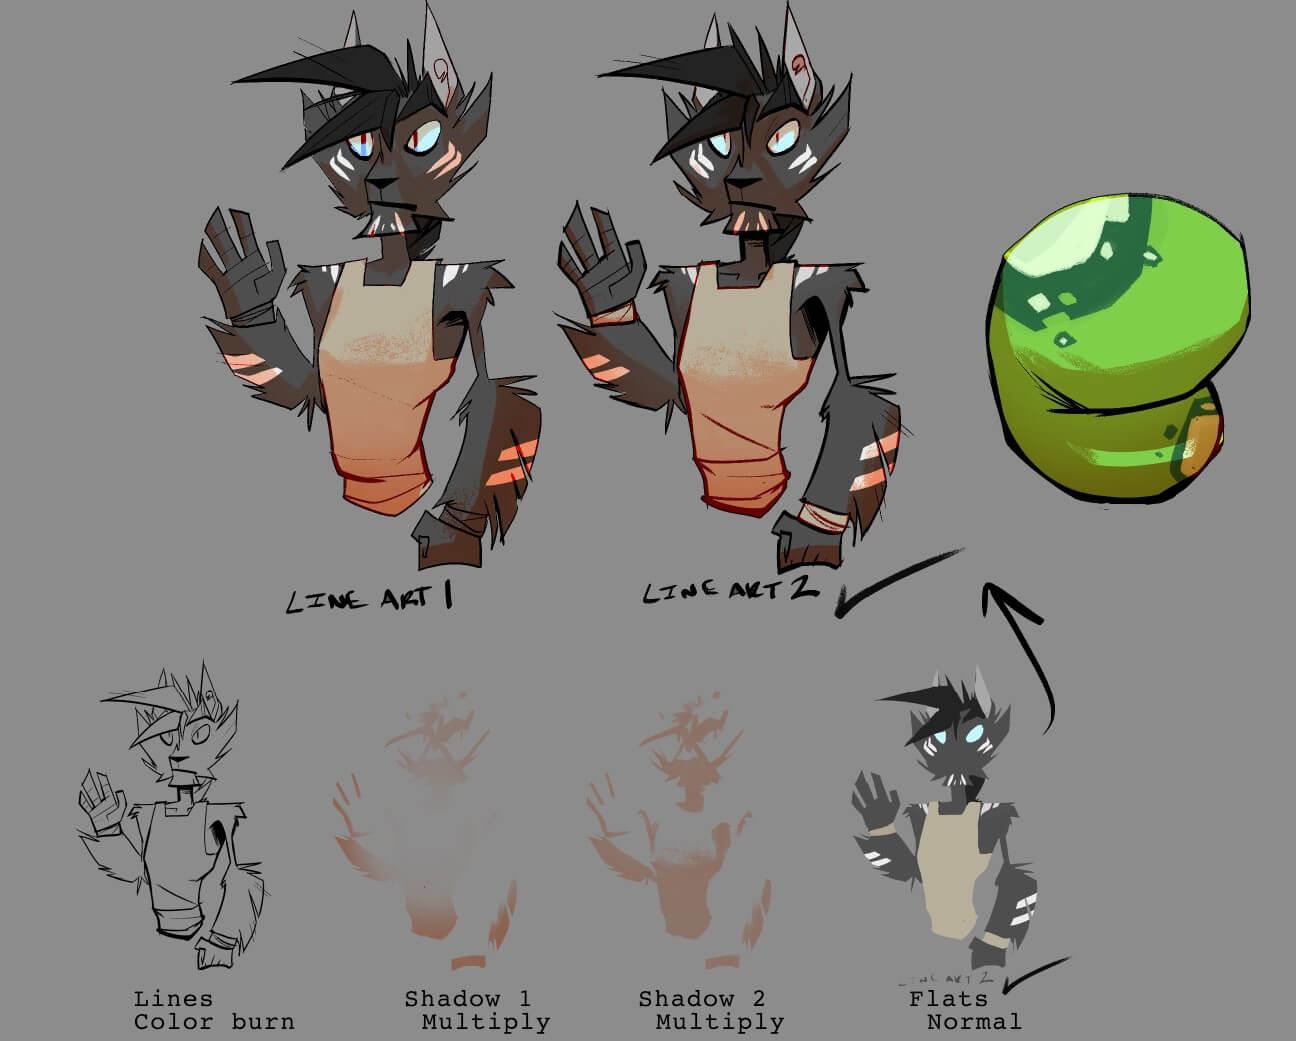 A visual breakdown of how to line and shade, featuring a half-body of a feline anthro and a green bean shape. Text reads:"Line art 1", "Line art 2", "Lines, Color Burn", "Shadow 1, Multiply", "Shadow 2, Multiply", and "Flats, Normal"